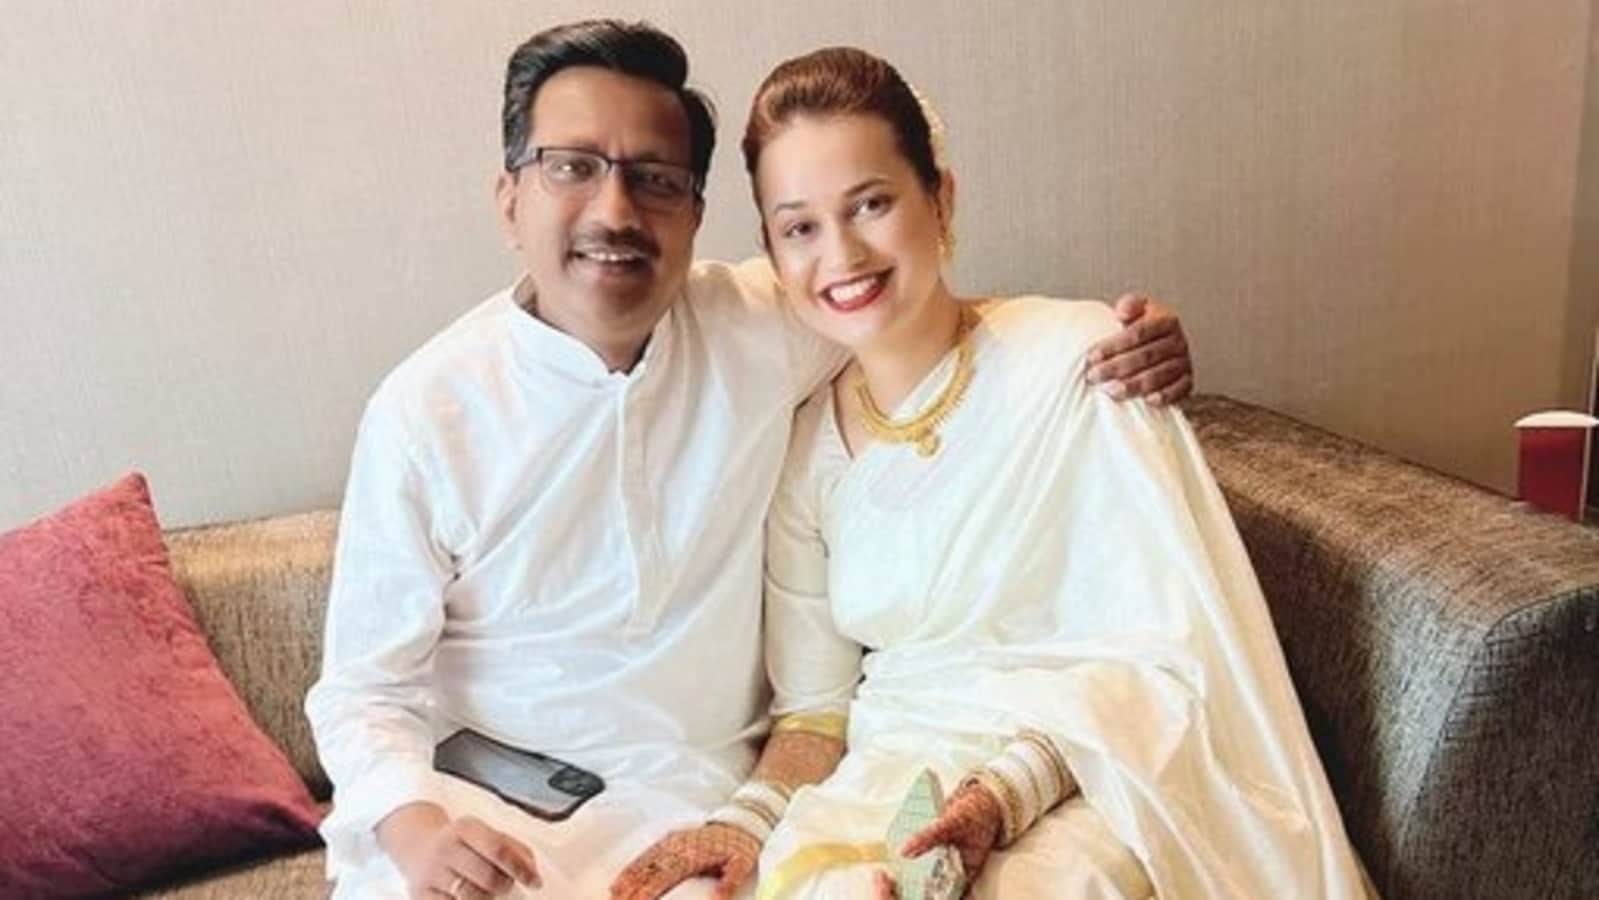 ‘New profile picture’: IAS officer Tina Dabi posts latest photo with husband